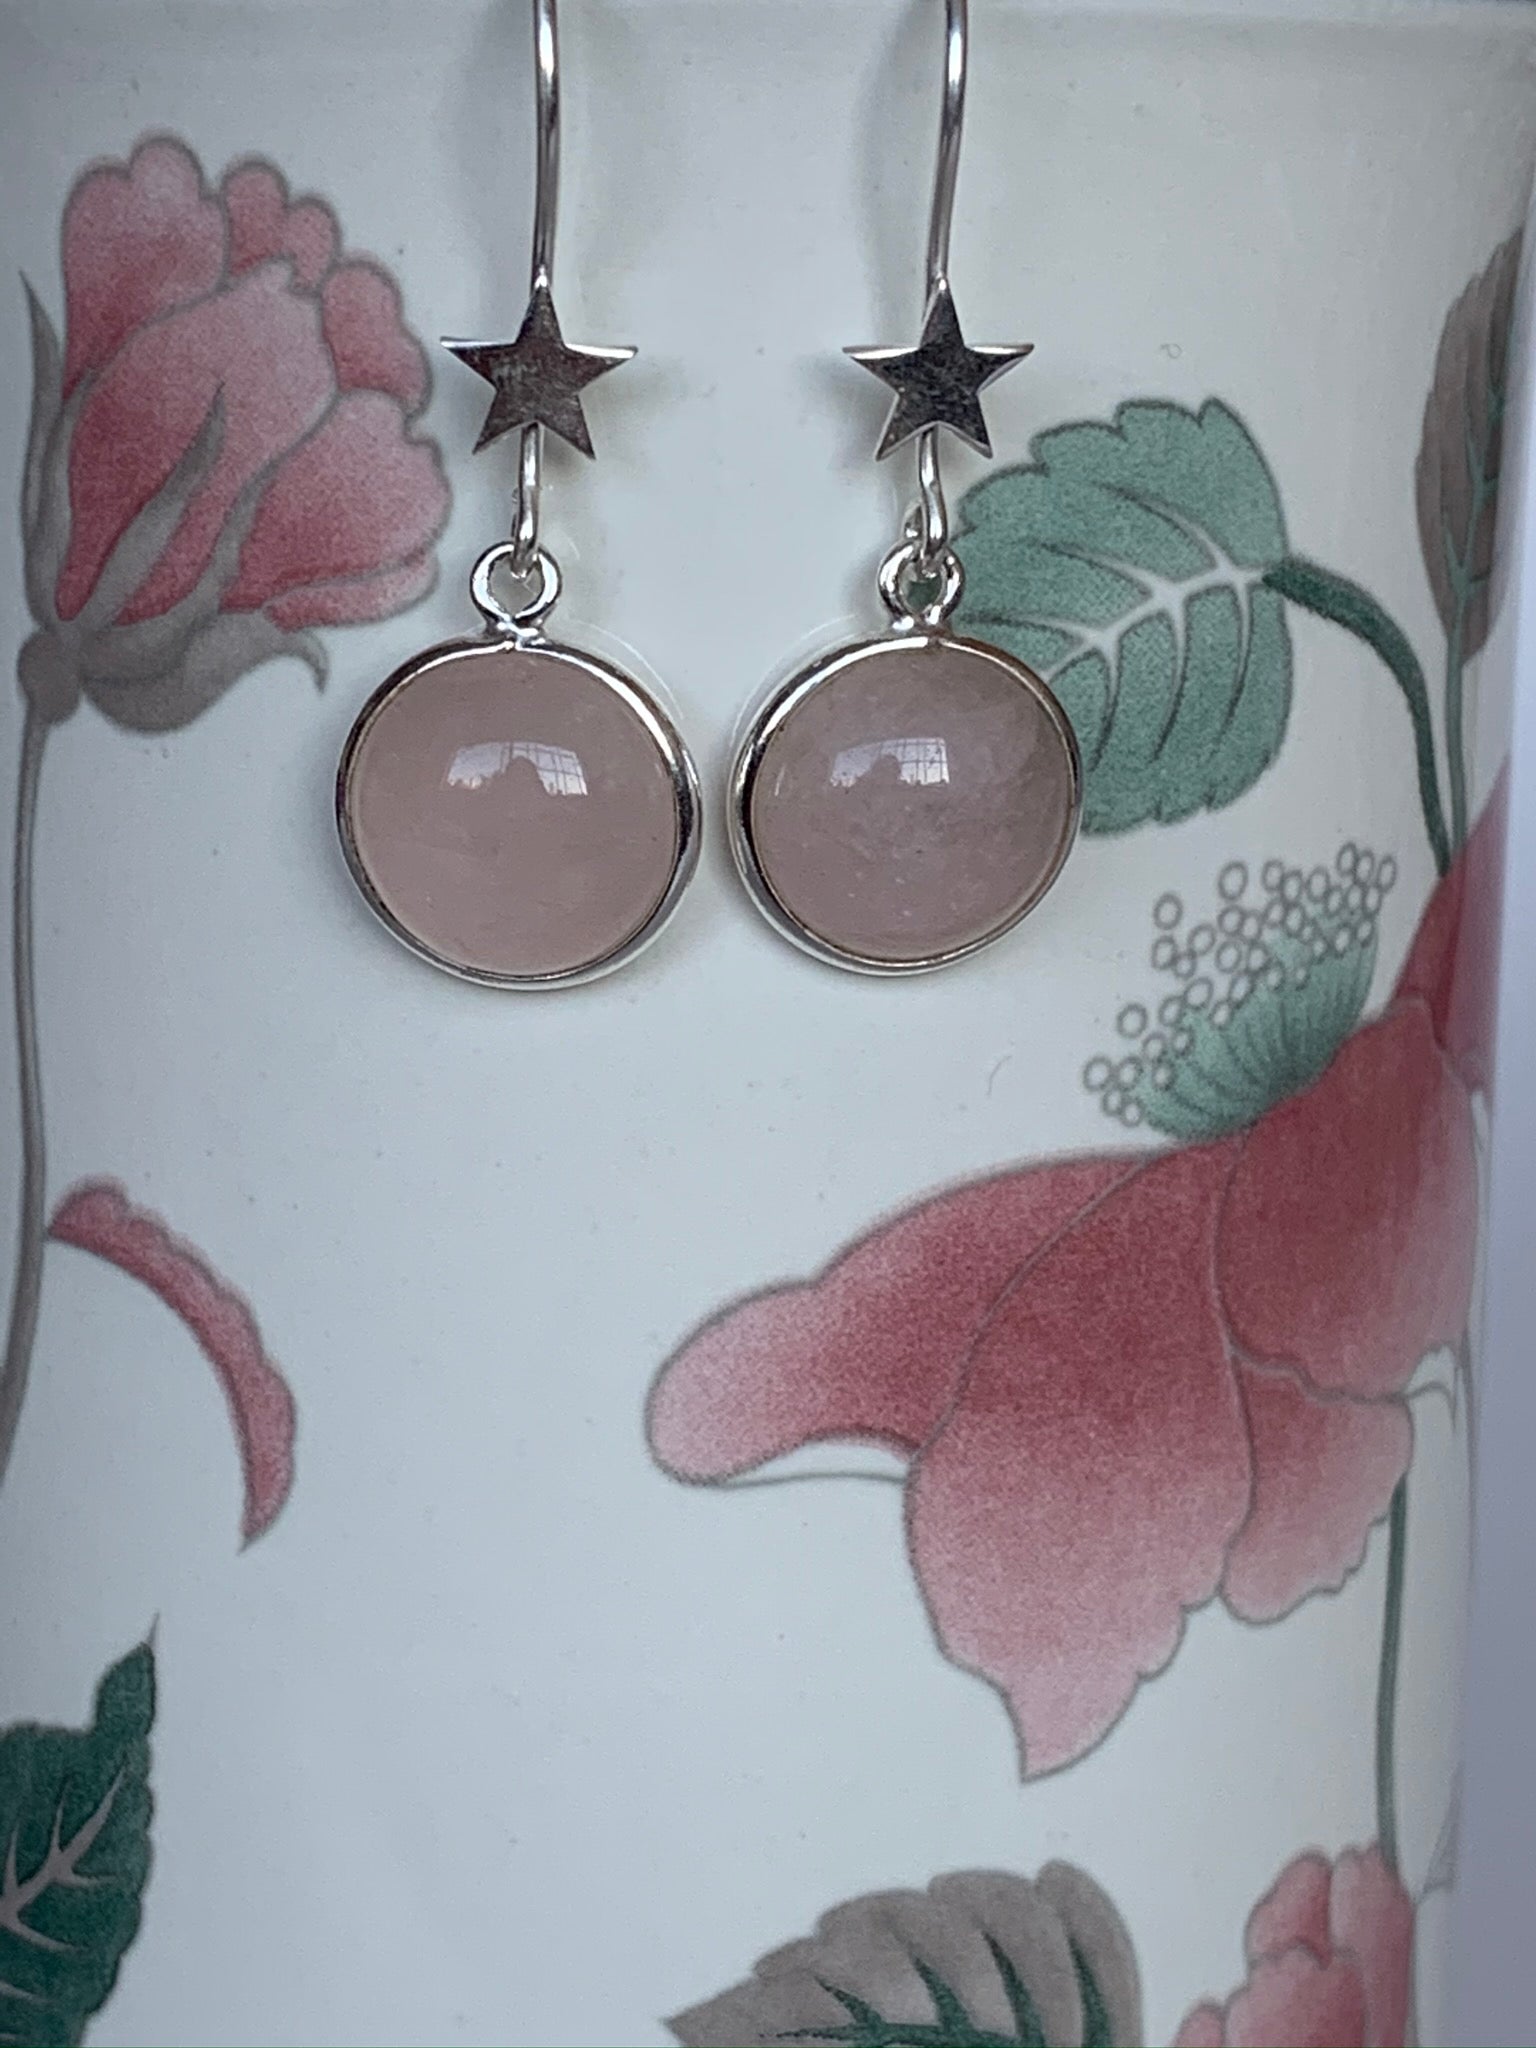 Close-up view. Good size, round rose quartz gemstones, set in sterling silver, dangle from a sterling silver star. These have wires, not posts, are lightweight and are approximately 1½" long.